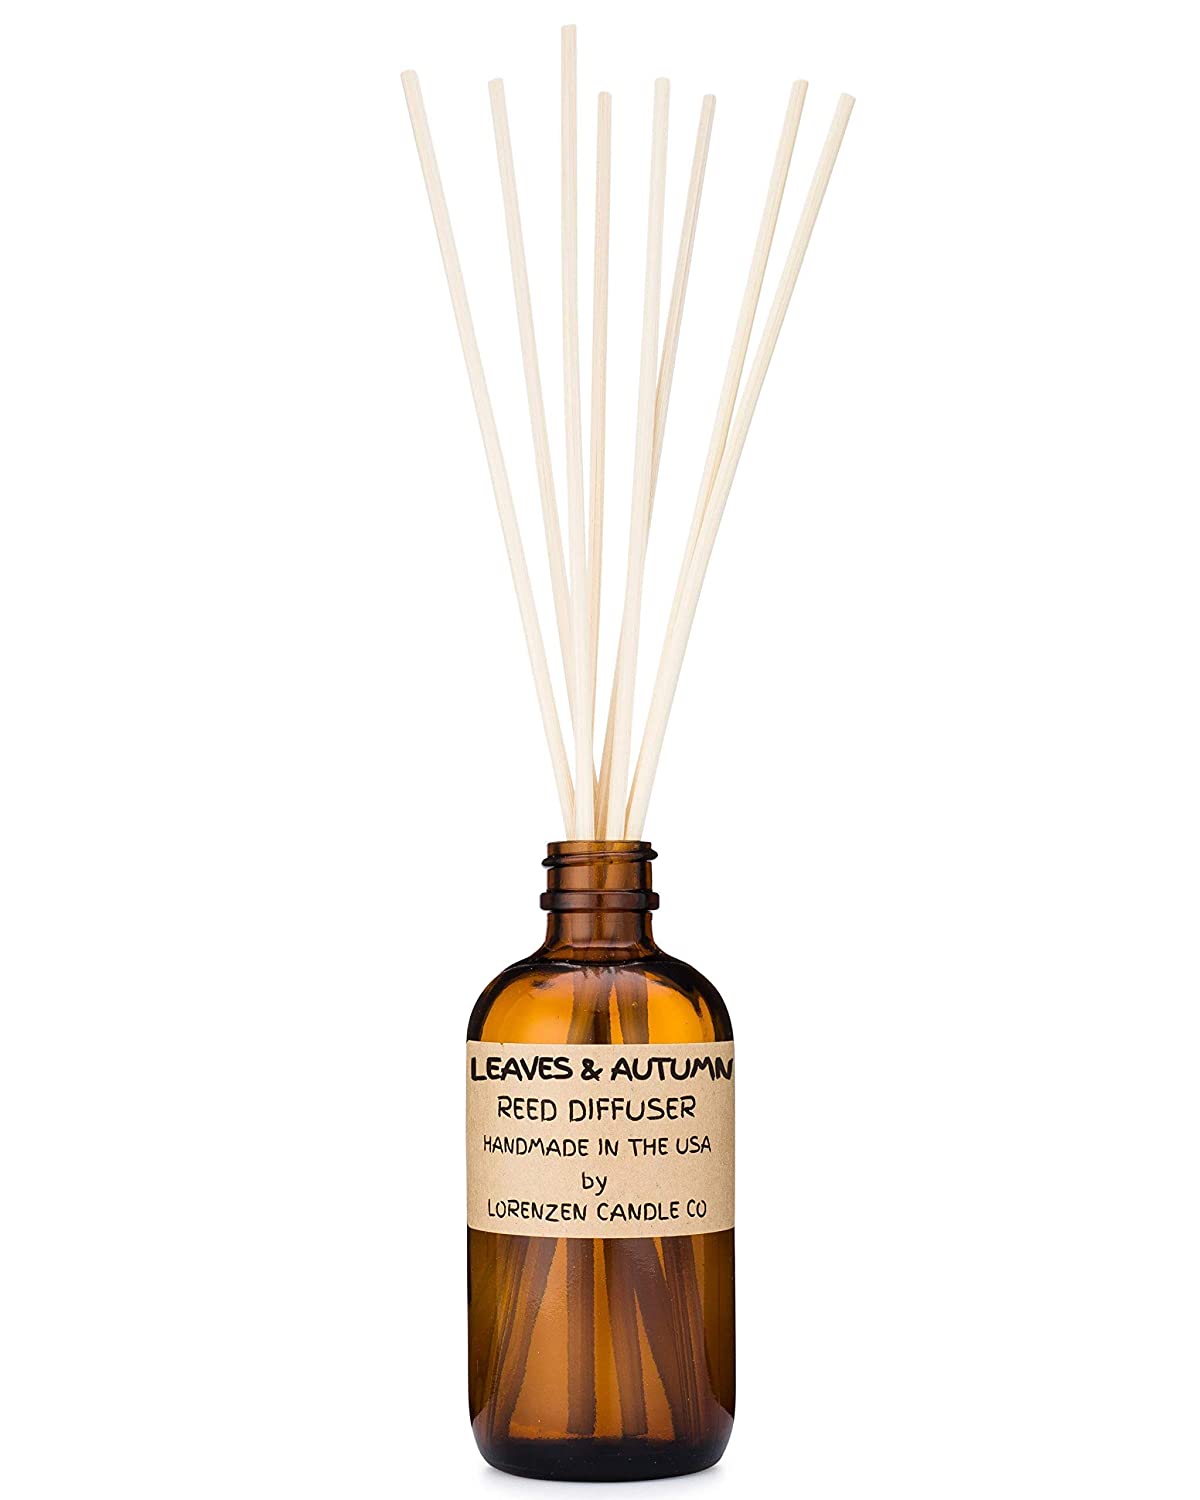 Leaves & Autumn Reed Diffuser Set 3oz | Handmade by Lorenzen Candle Co